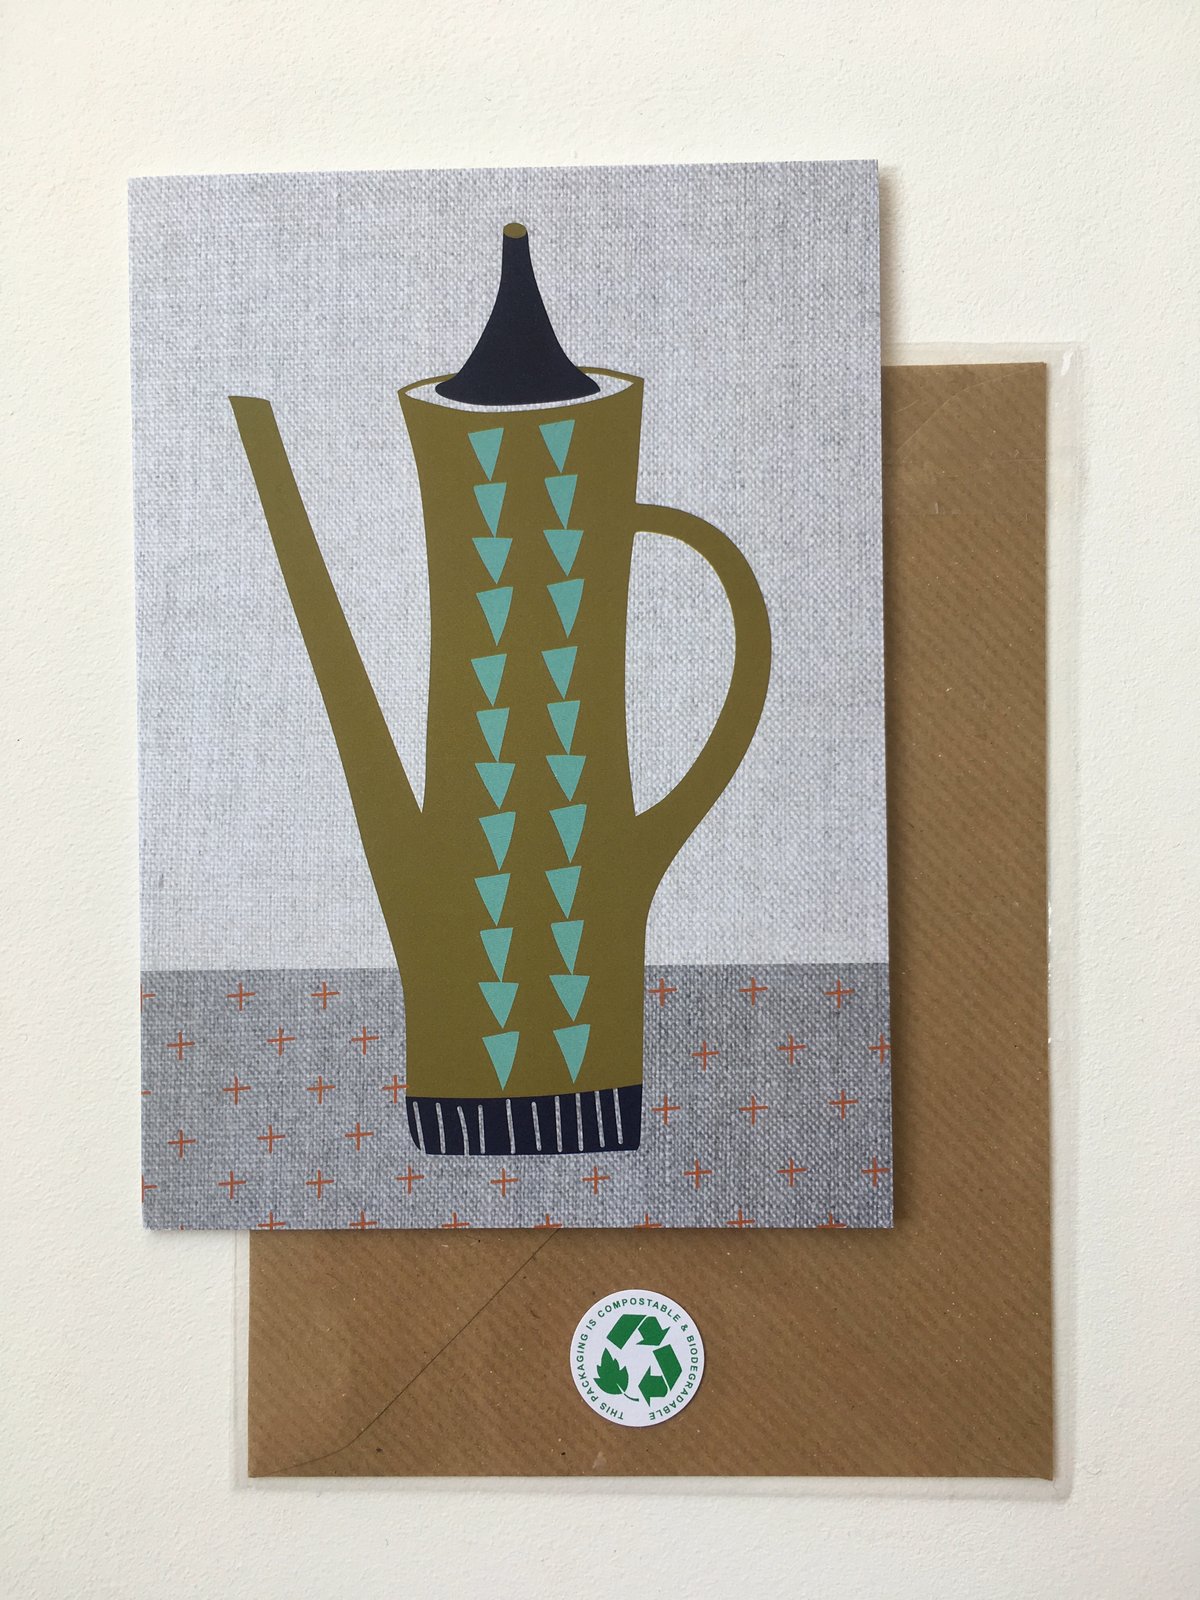 Coffee Pot Cards - Orange Kettle, Yellow Stripe, Dotty Red, Vertical Leaf & Green Triangles